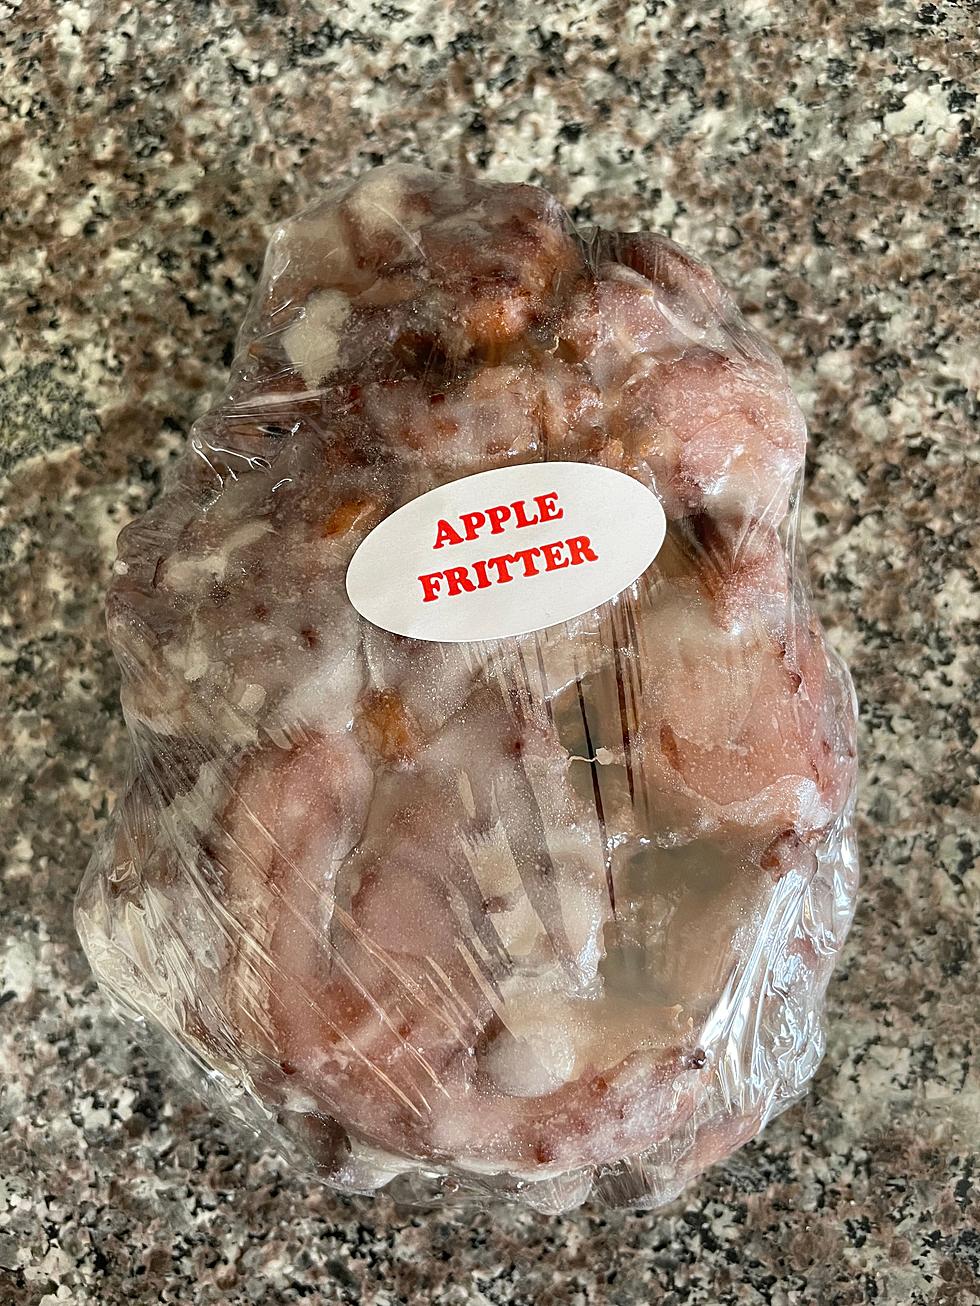 ‘Poem’ Professes My Love for Apple Fritters Found at Hudson Valley Stewart’s Shops